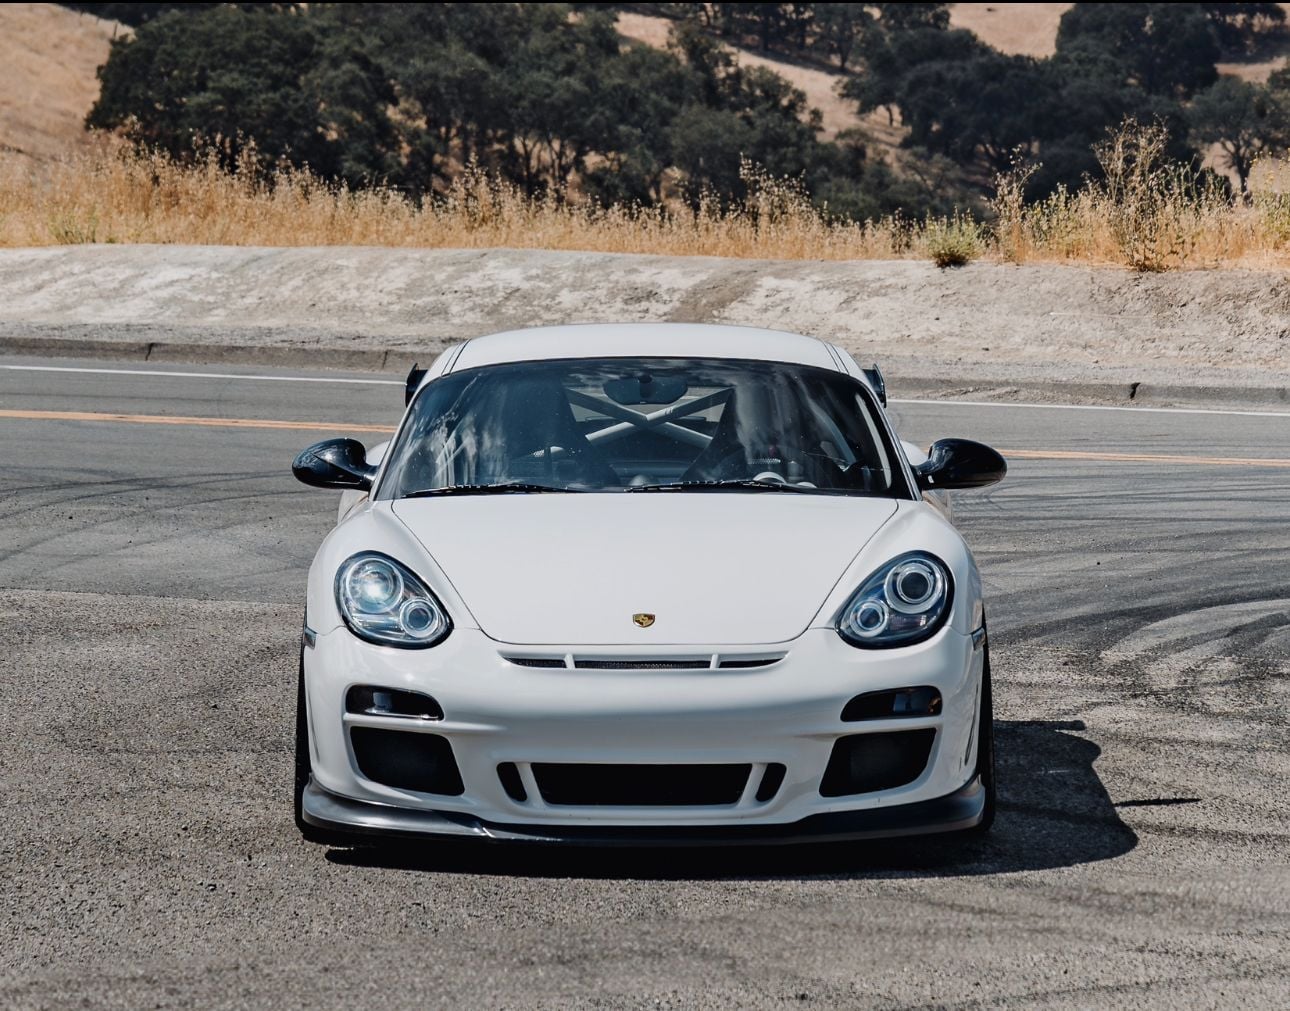 2012 Porsche Cayman - 2012 Porsche Cayman R with a 3.8 Swap, 6spd MT, Carbon GT2 Buckets, and much more. - Used - VIN WP0AB2A86CS793103 - 68,250 Miles - 6 cyl - 2WD - Manual - Coupe - White - Los Banos, CA 93635, United States